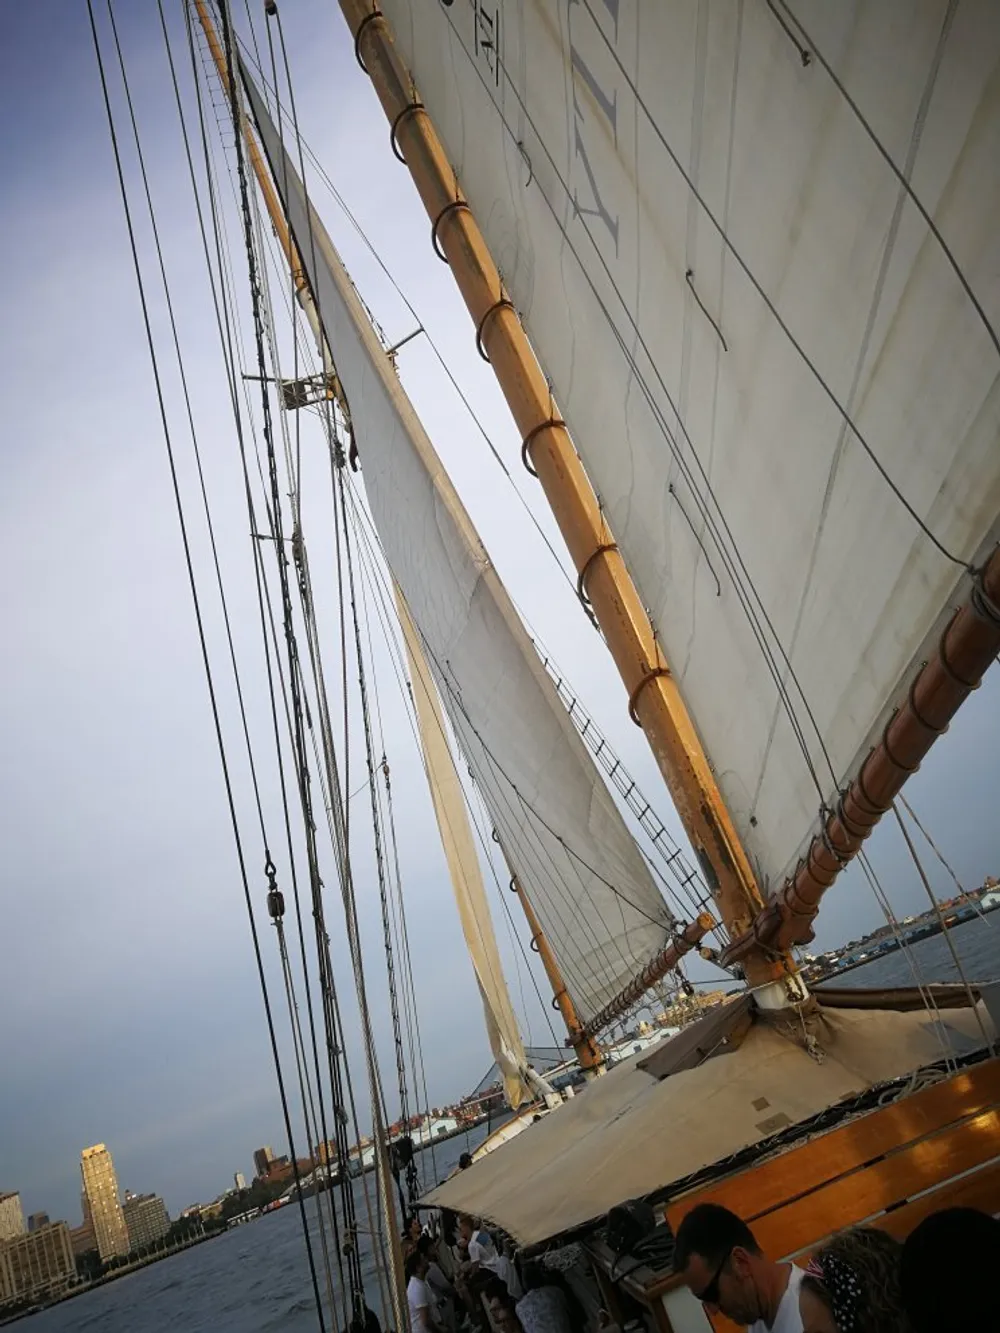 The image shows a group of people on a sailing ship with its billowing sails hoisted up the masts